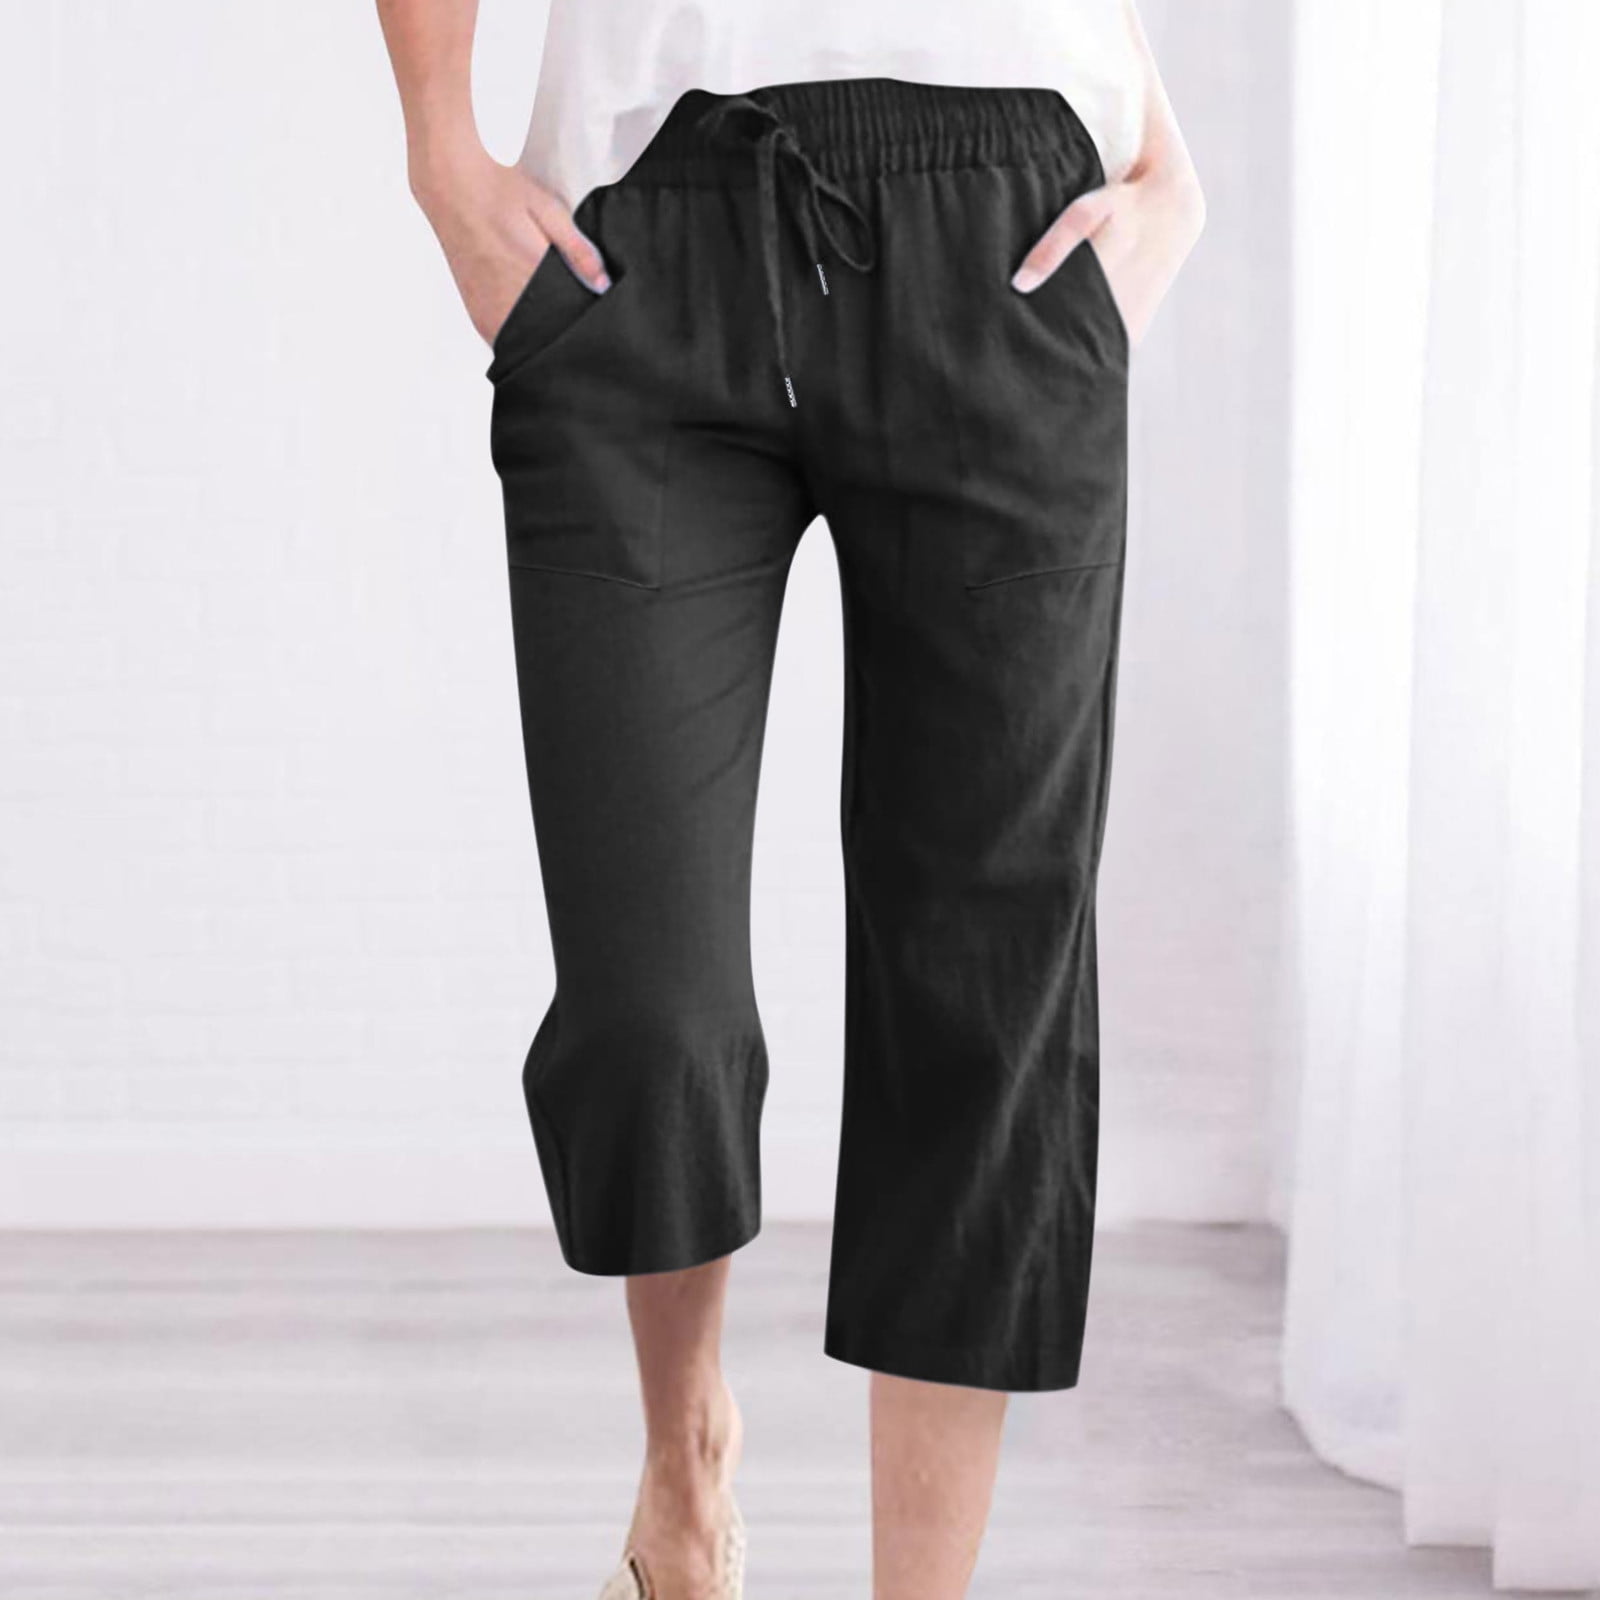 Summer Savings Clearance 2023,POROPL Casual Cotton Linen Solid Drawstring  Elastic Waist Long Straight Pants Ladies Pants Clearance for Under $5 Dark  Gray Size L 